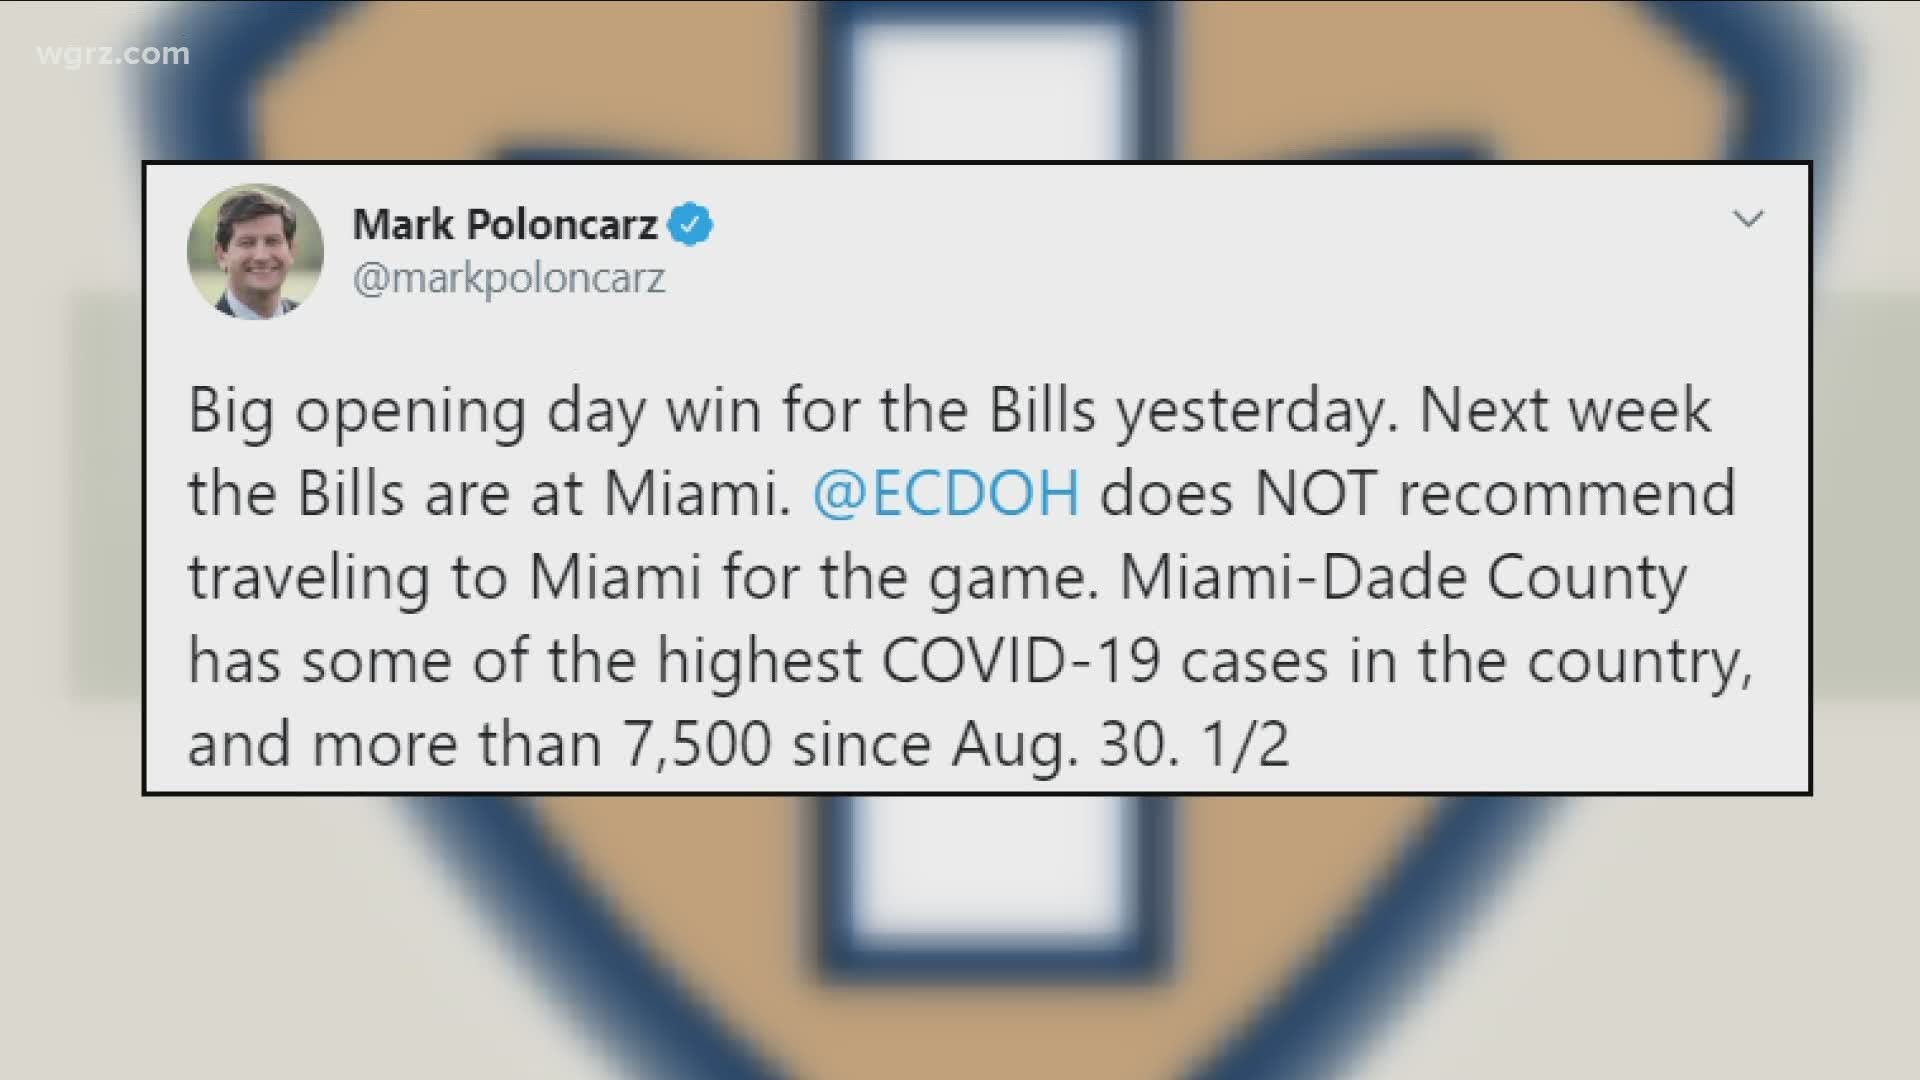 If you go to Miami for the bills first road game of the season this Sunday, you'll have to quarantine for 2 weeks when you get back.